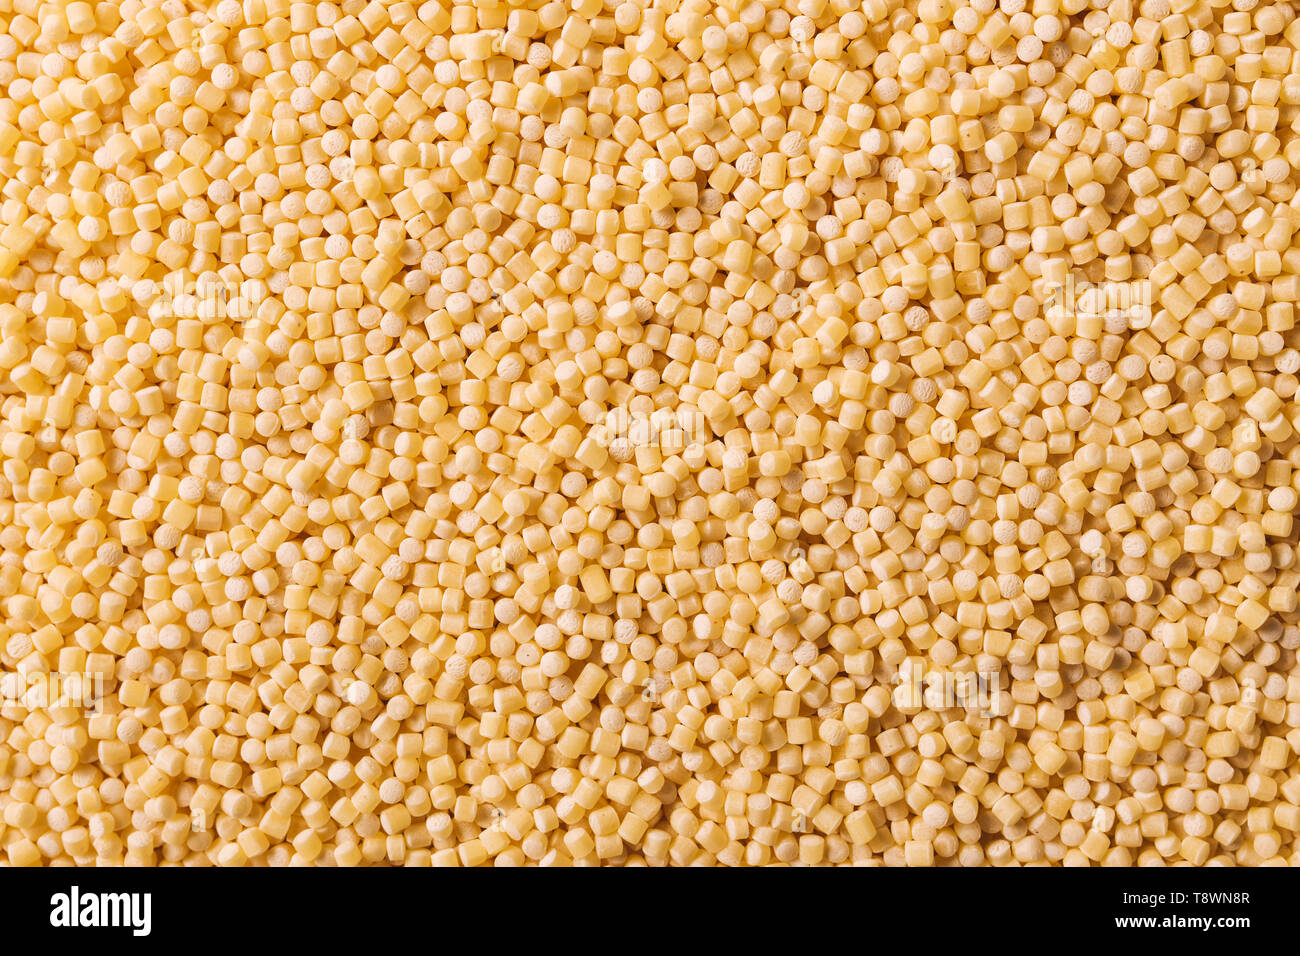 Pasta pellets as food background, top view Stock Photo